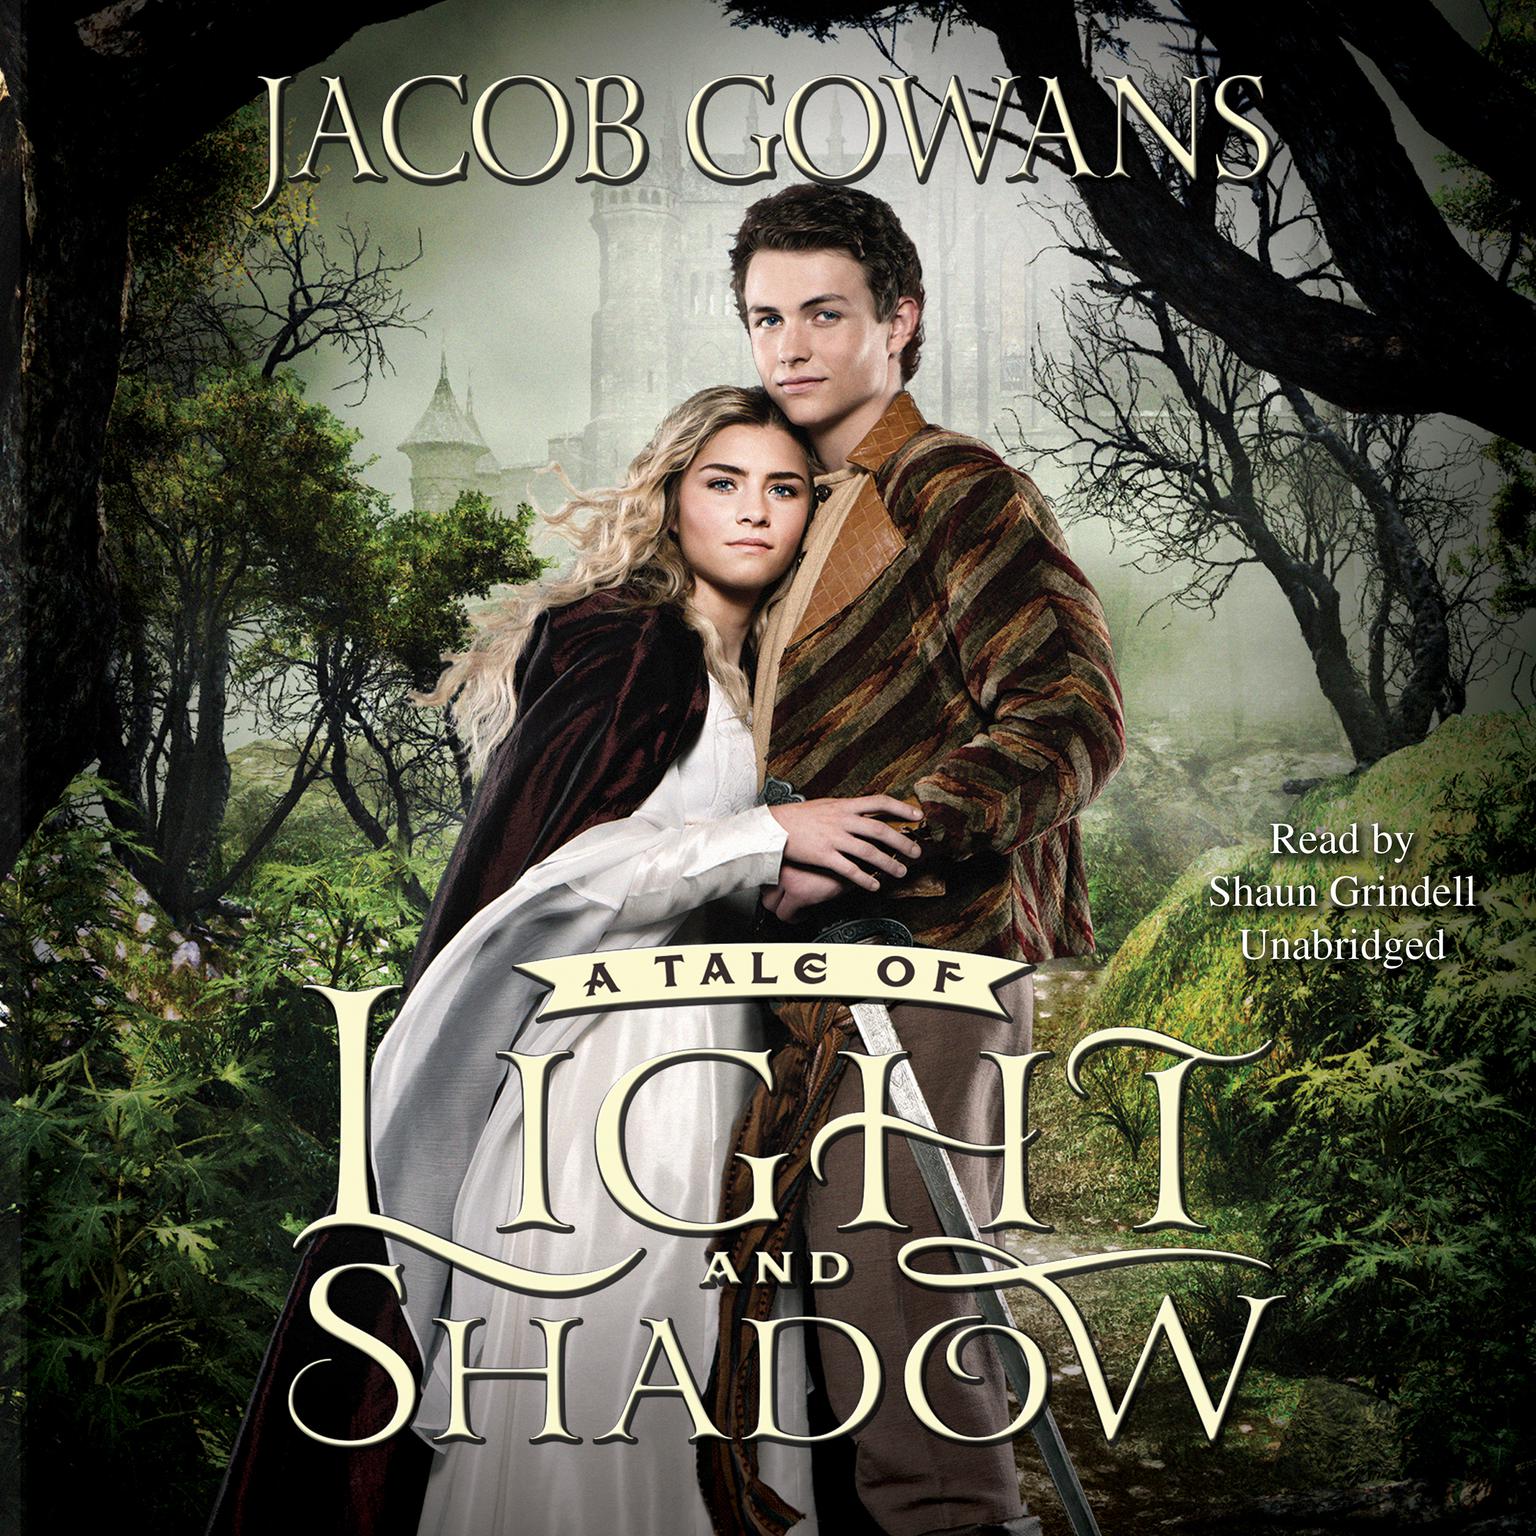 A Tale of Light and Shadow Audiobook, by Jacob Gowans